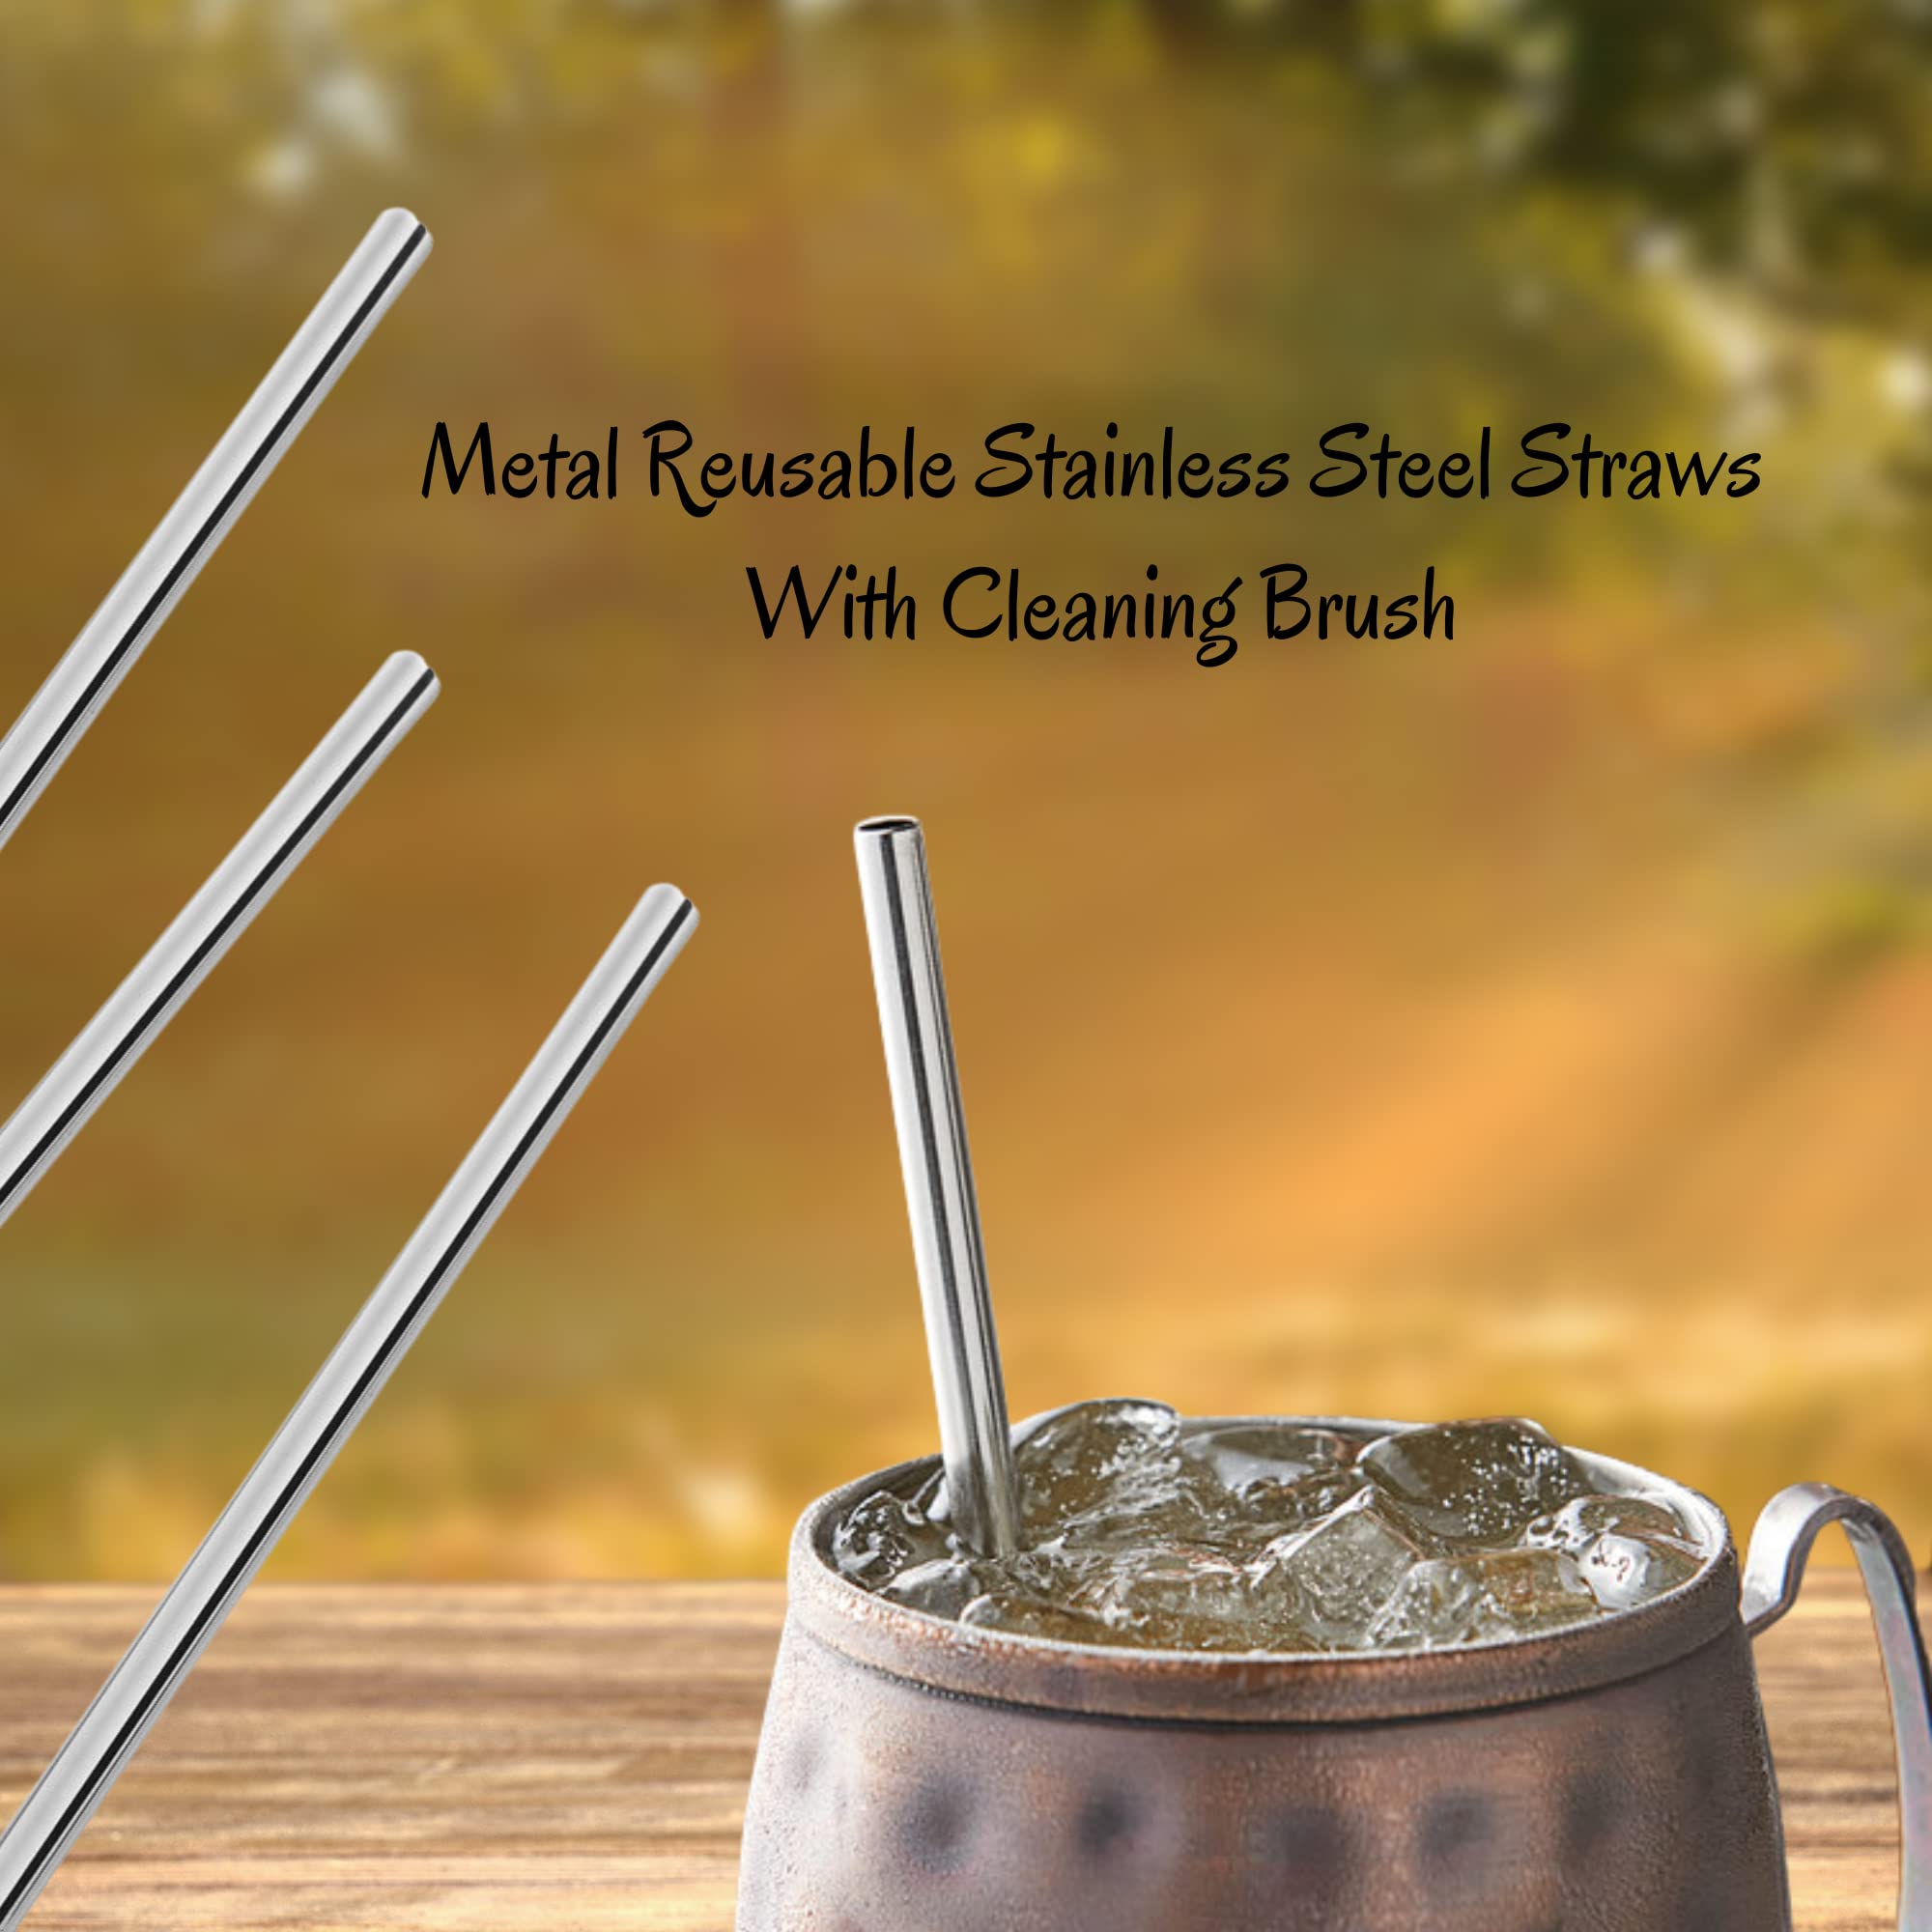 Bloody Mary Bar Supplies Set, Includes Glass Rimmer, 4 Stainless Steel Reusable Cocktail Picks, and 4 Stainless Steel Reusable Straws with Cleaning Brush. Gift Set, Bartender Kit, Drink Bundle.